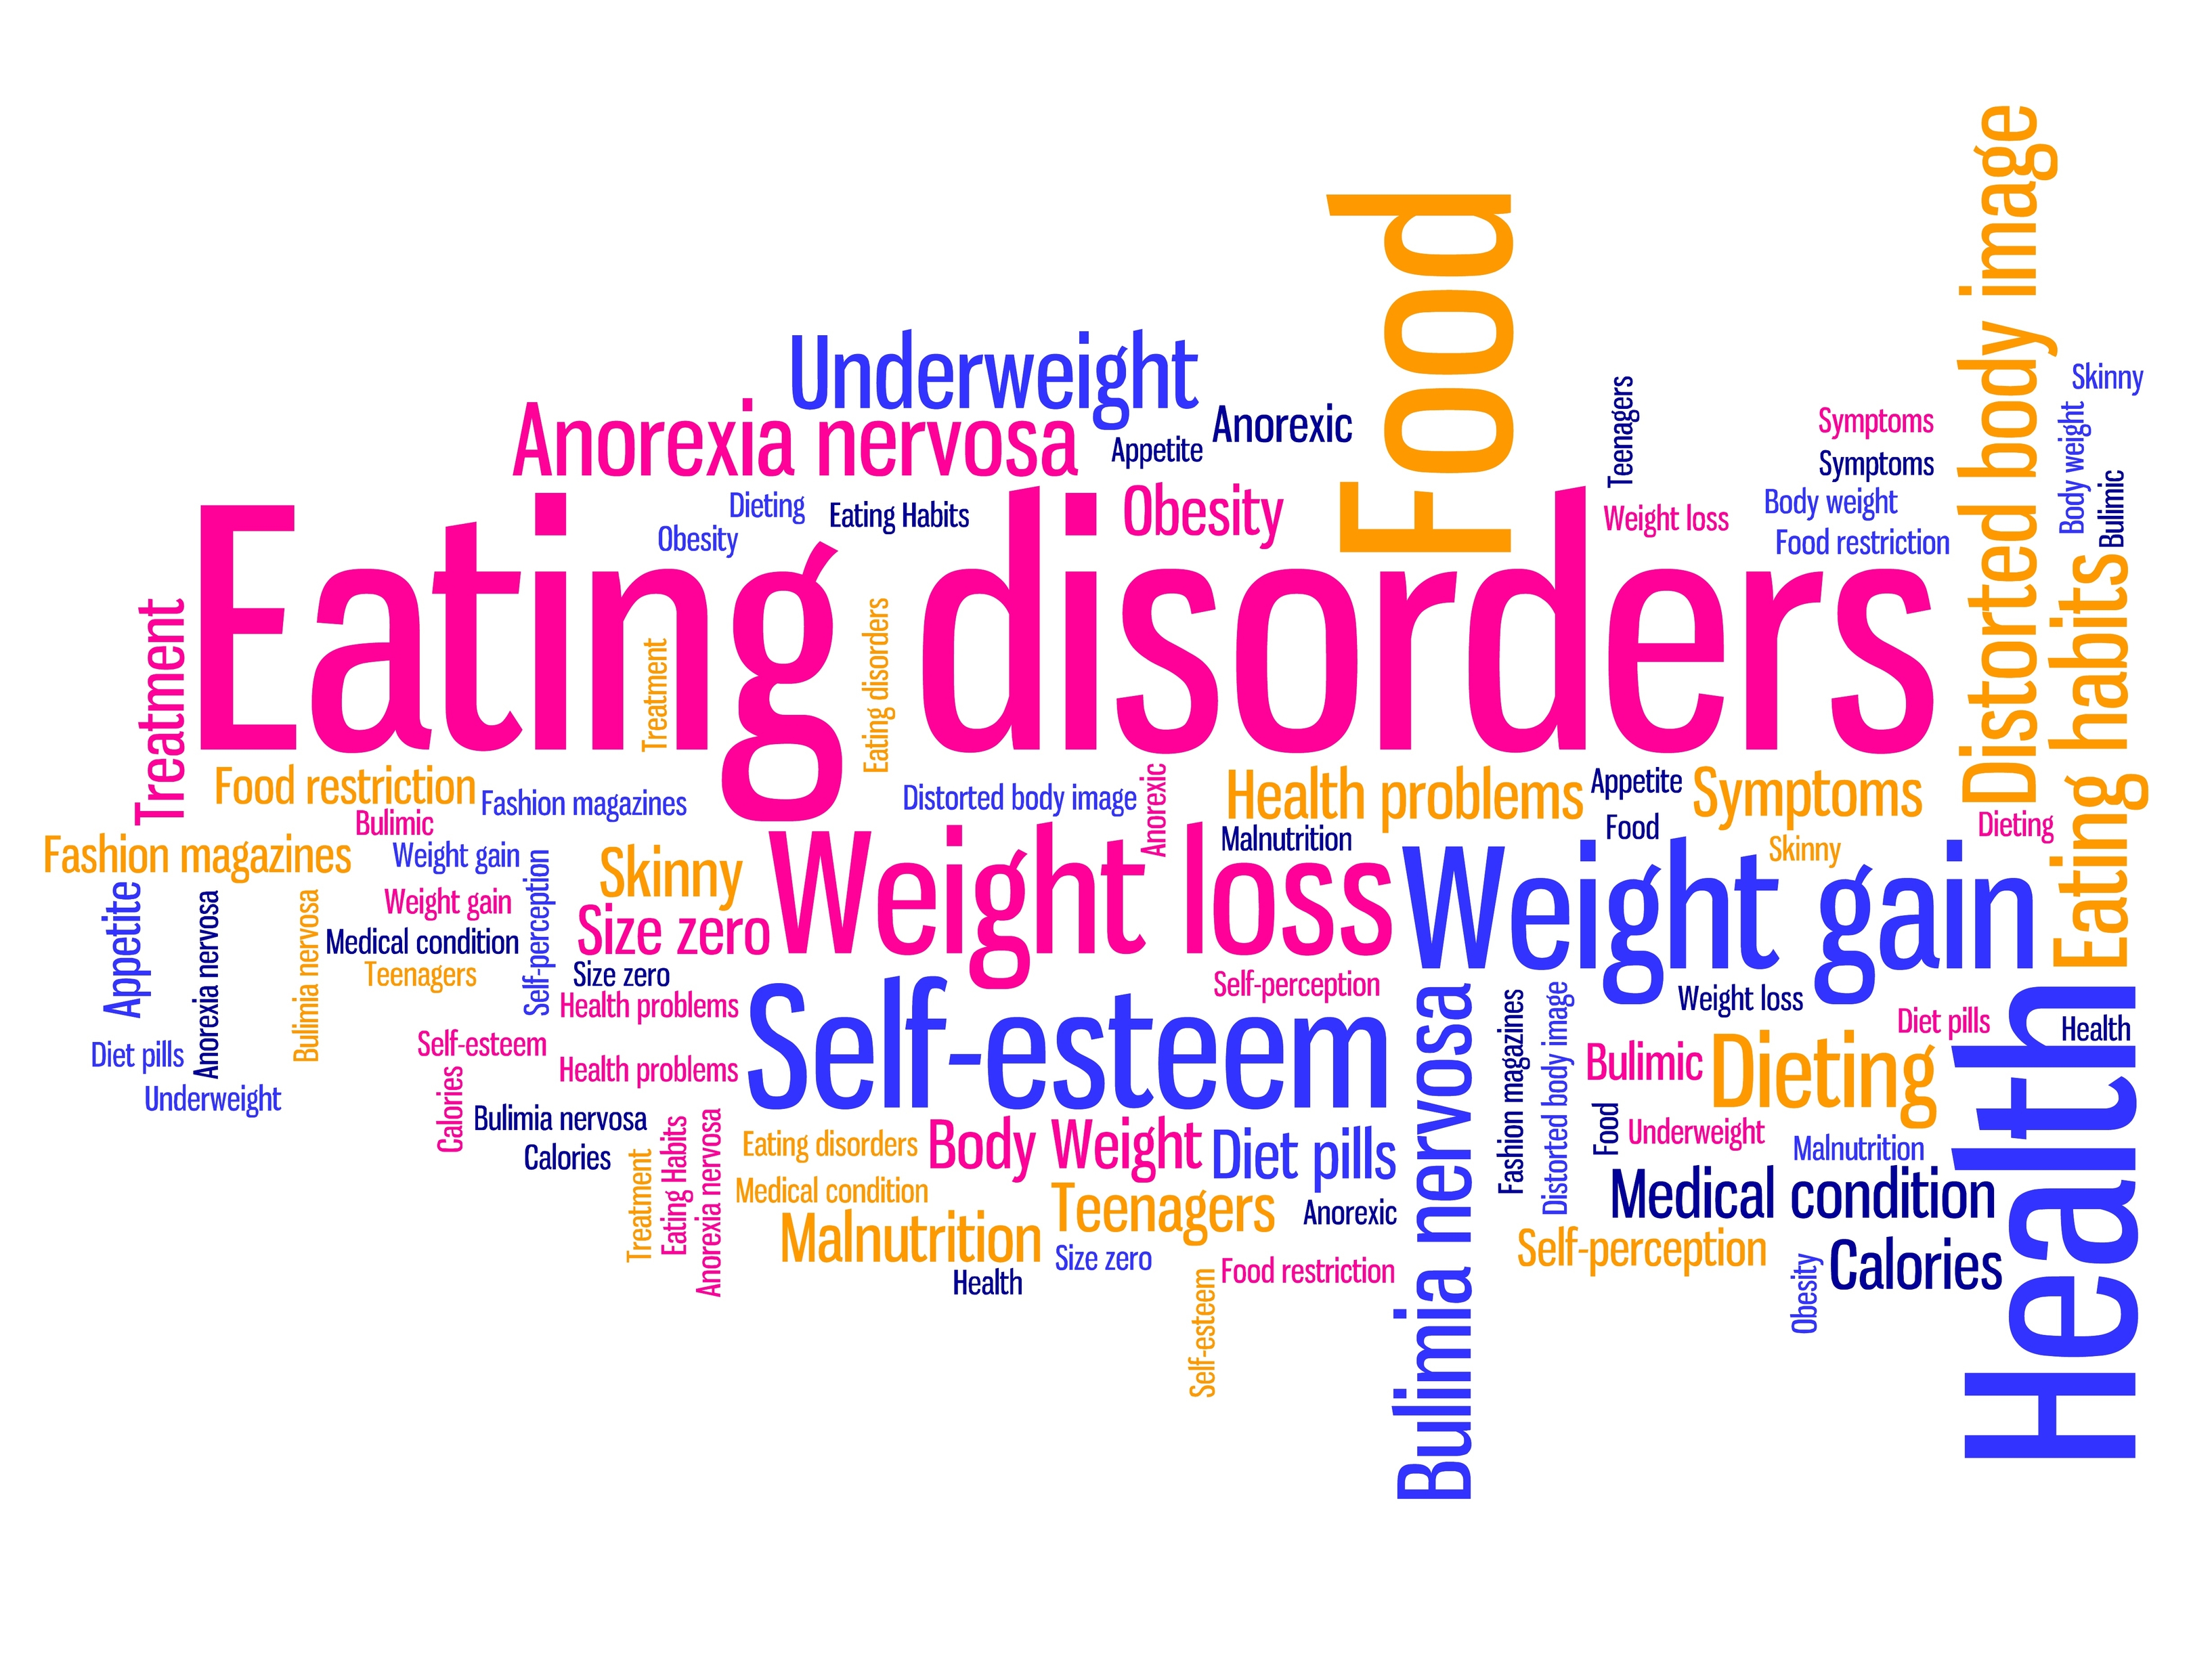 psychology research questions about eating disorders